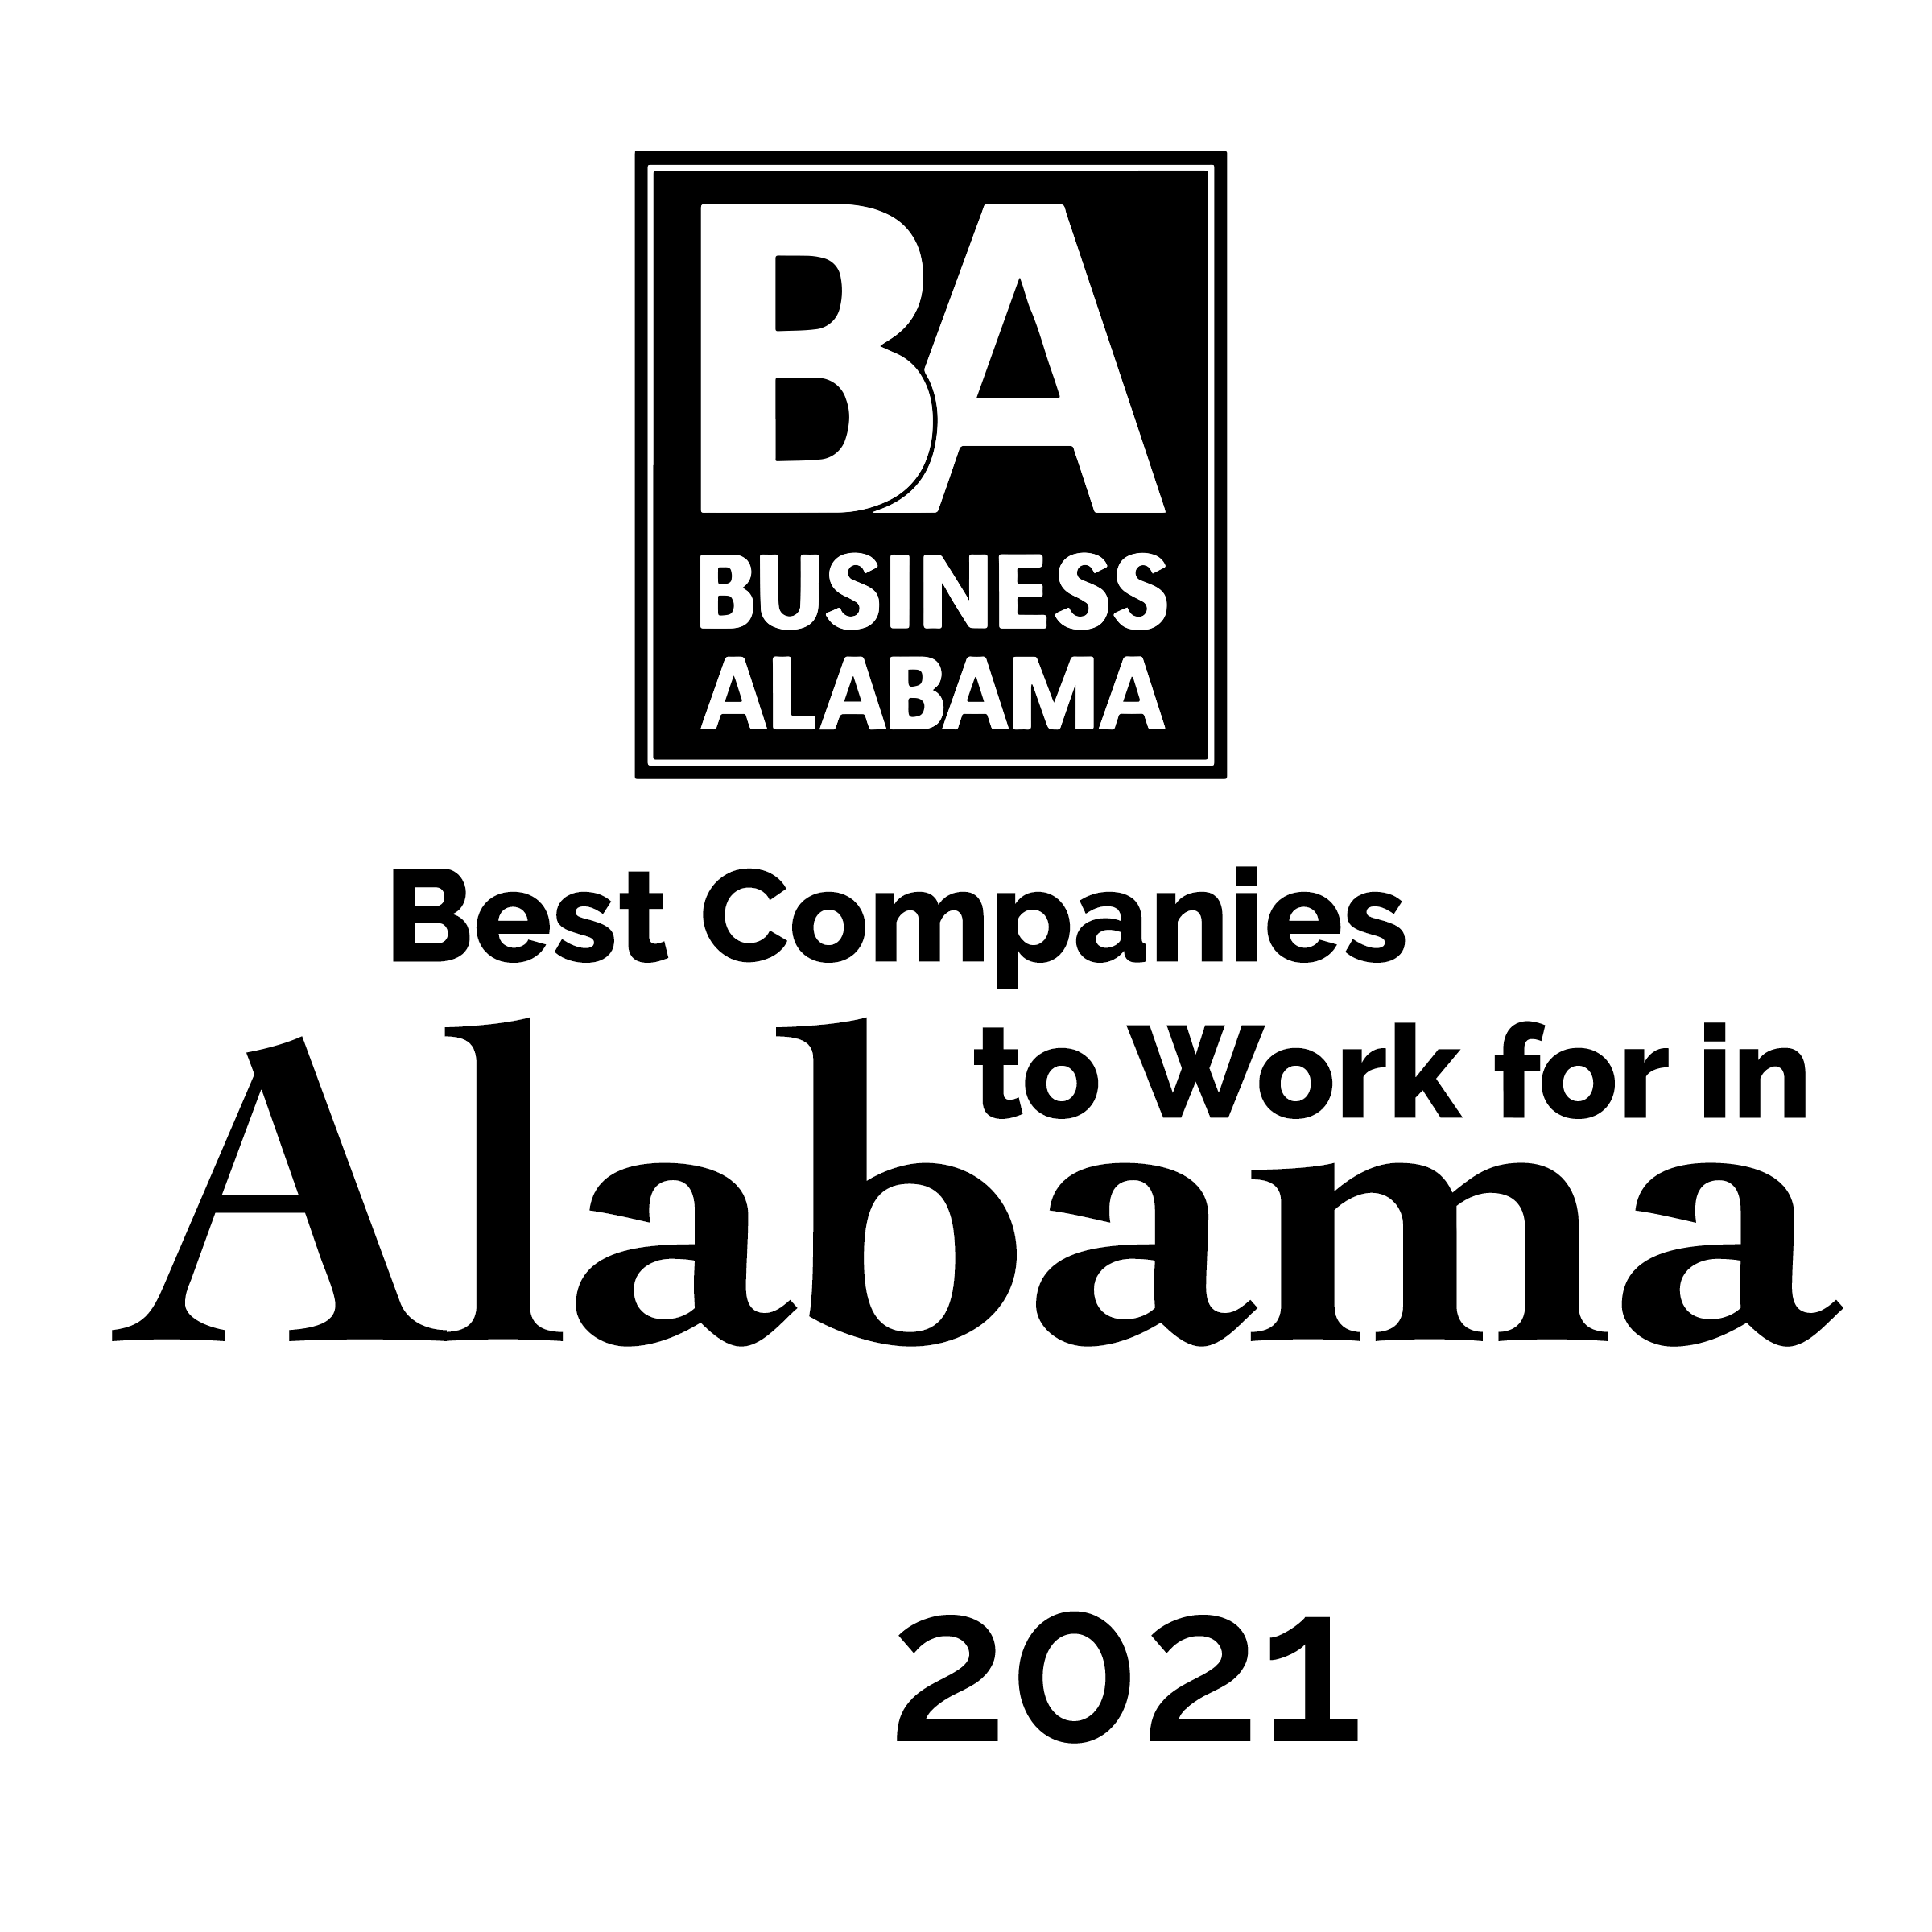 Best Companies to work for in Alabama award 2021